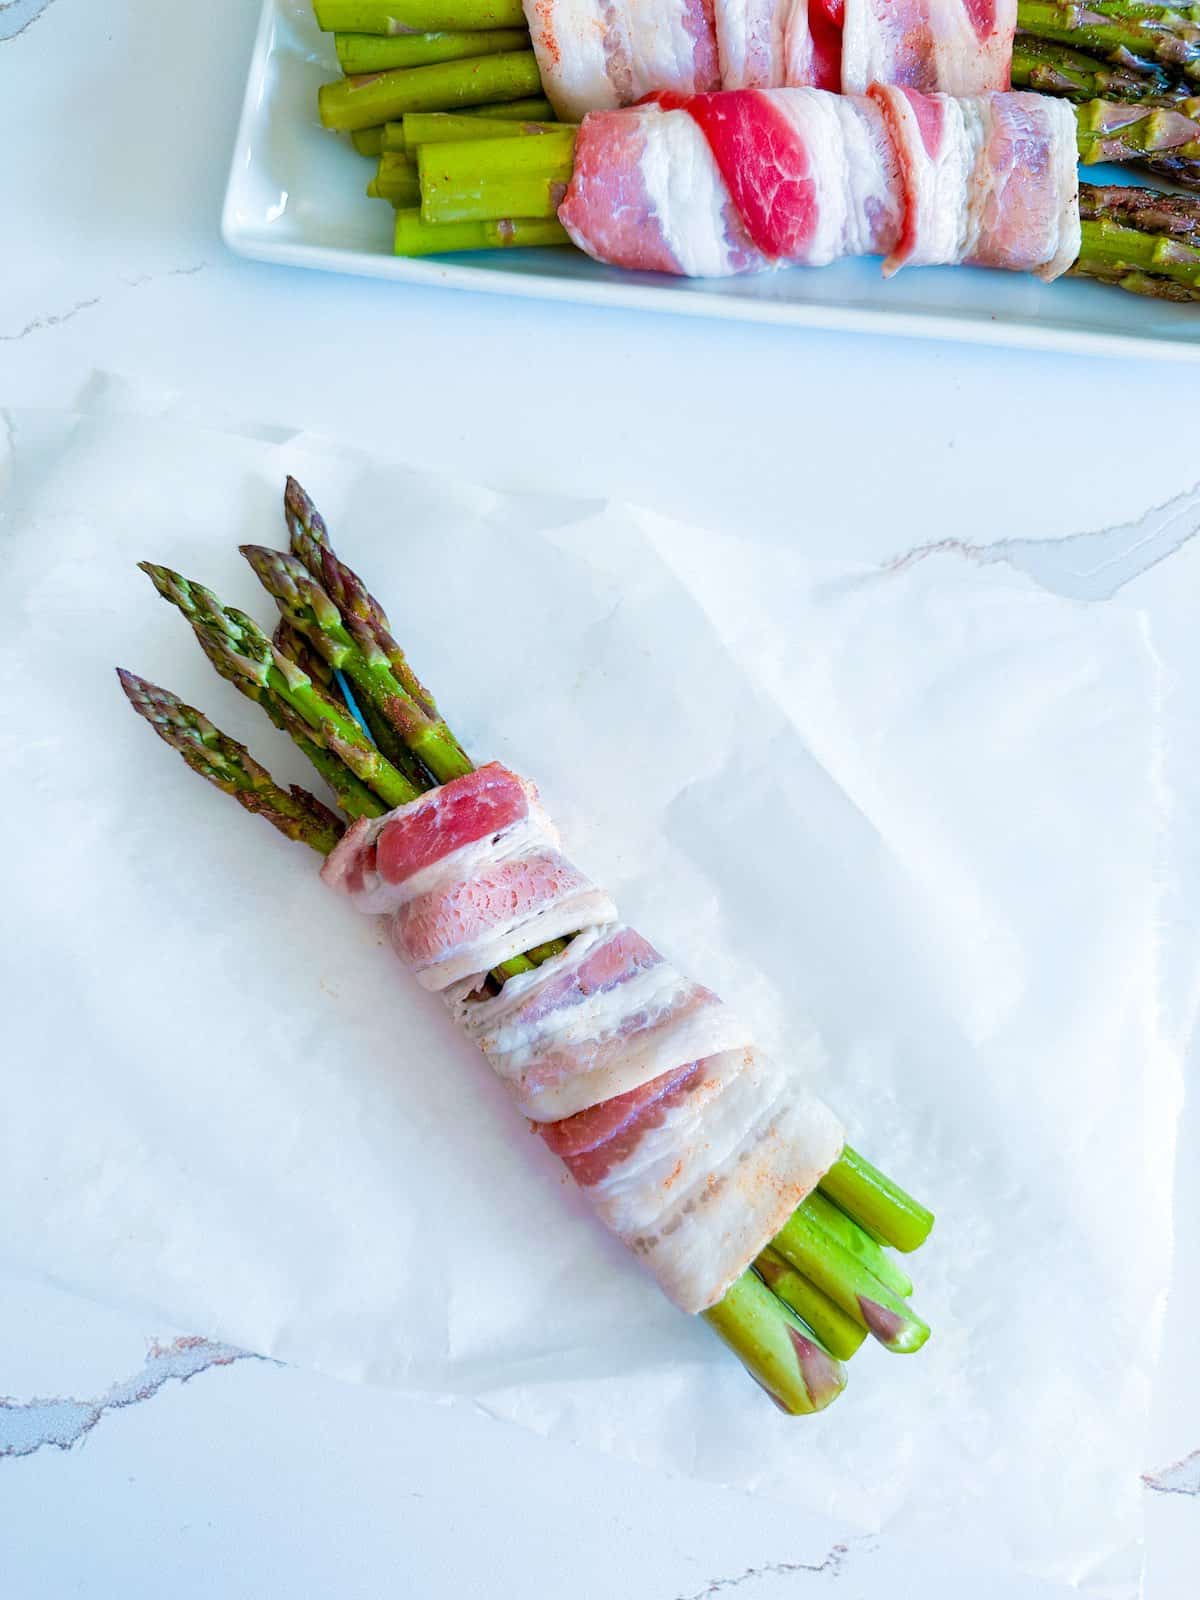 A bundle of asparagus spears wrapped in bacon.